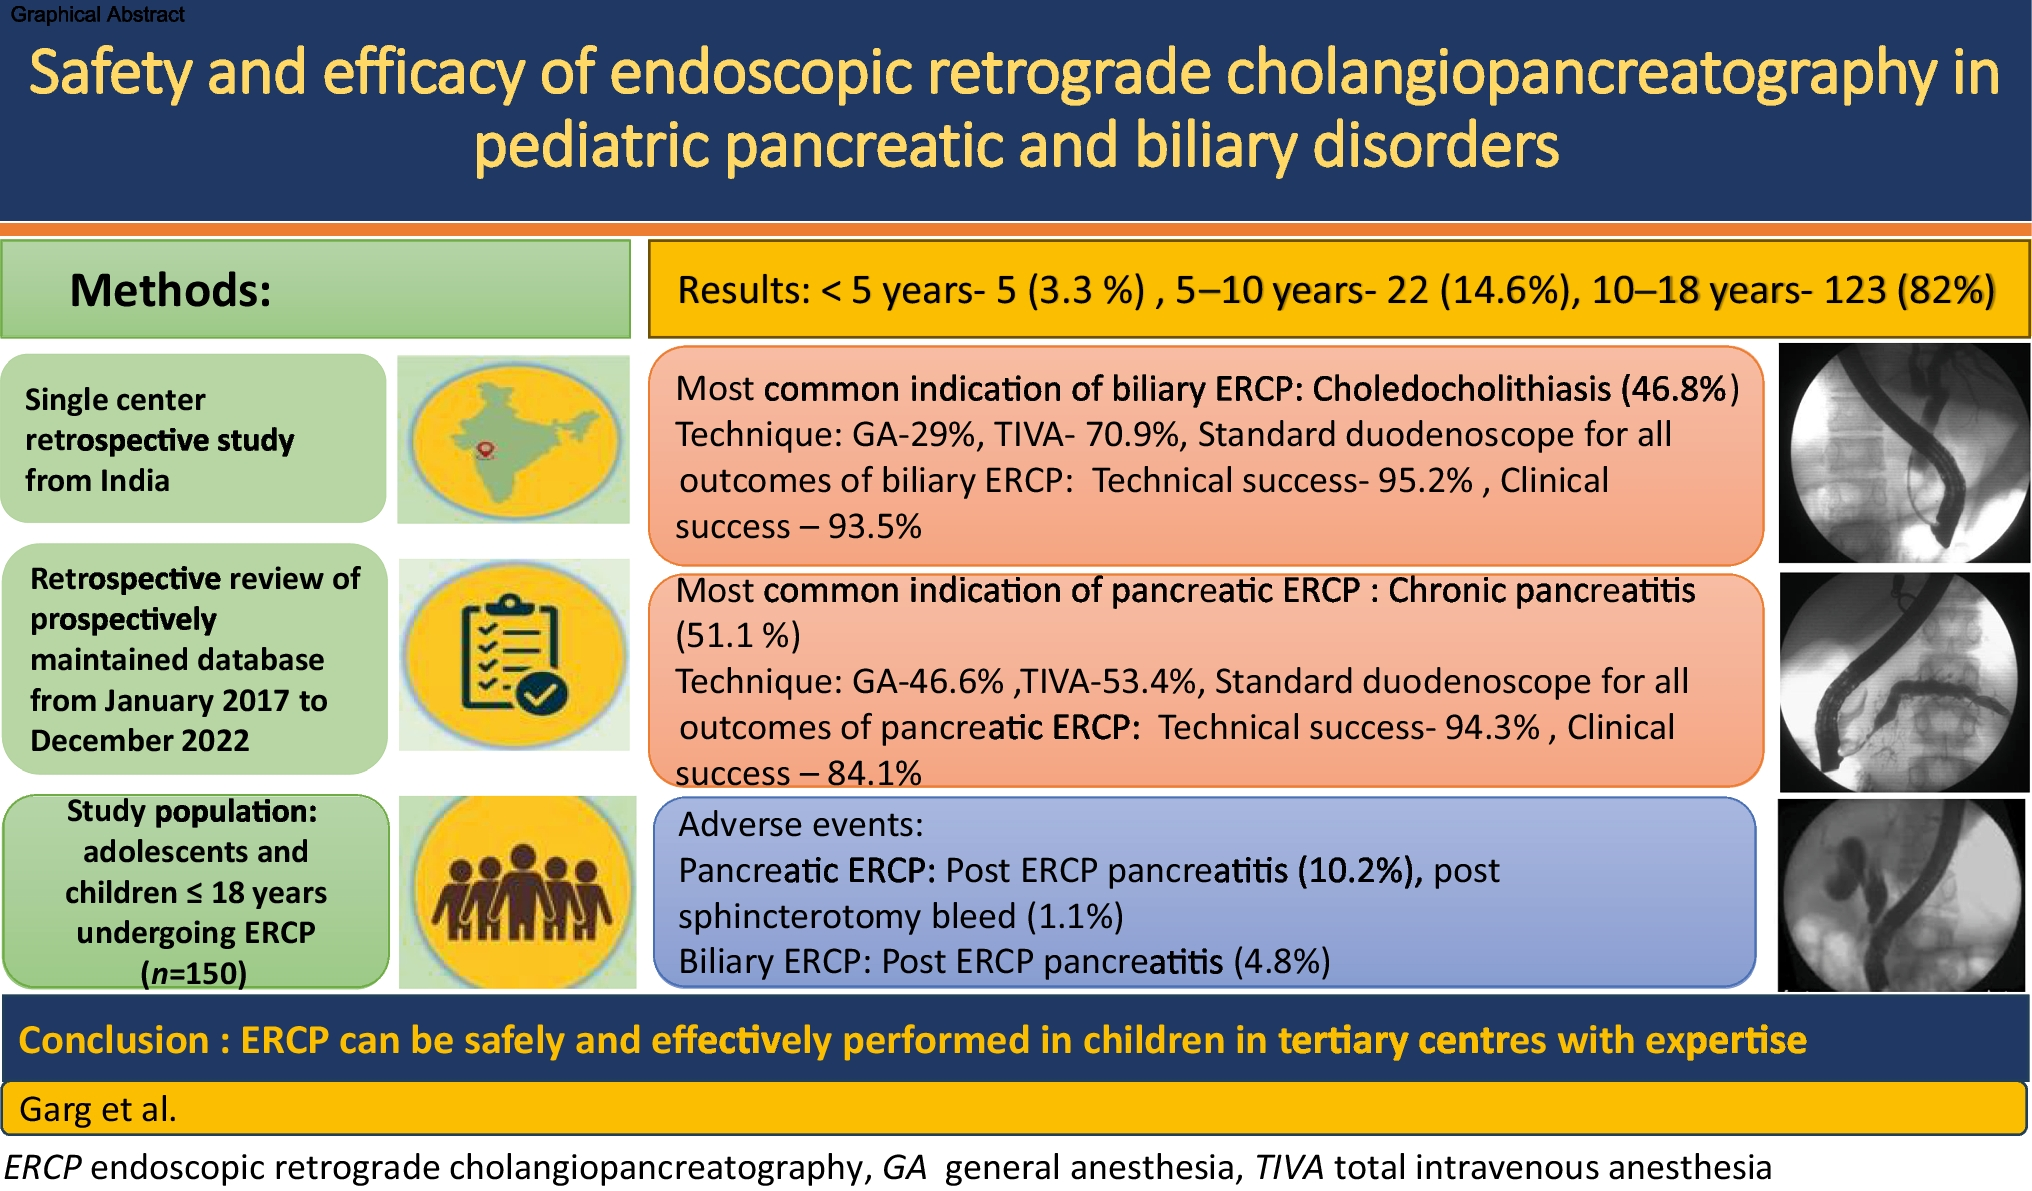 Safety and efficacy of endoscopic retrograde cholangiopancreatography in pediatric pancreatic and biliary disorders